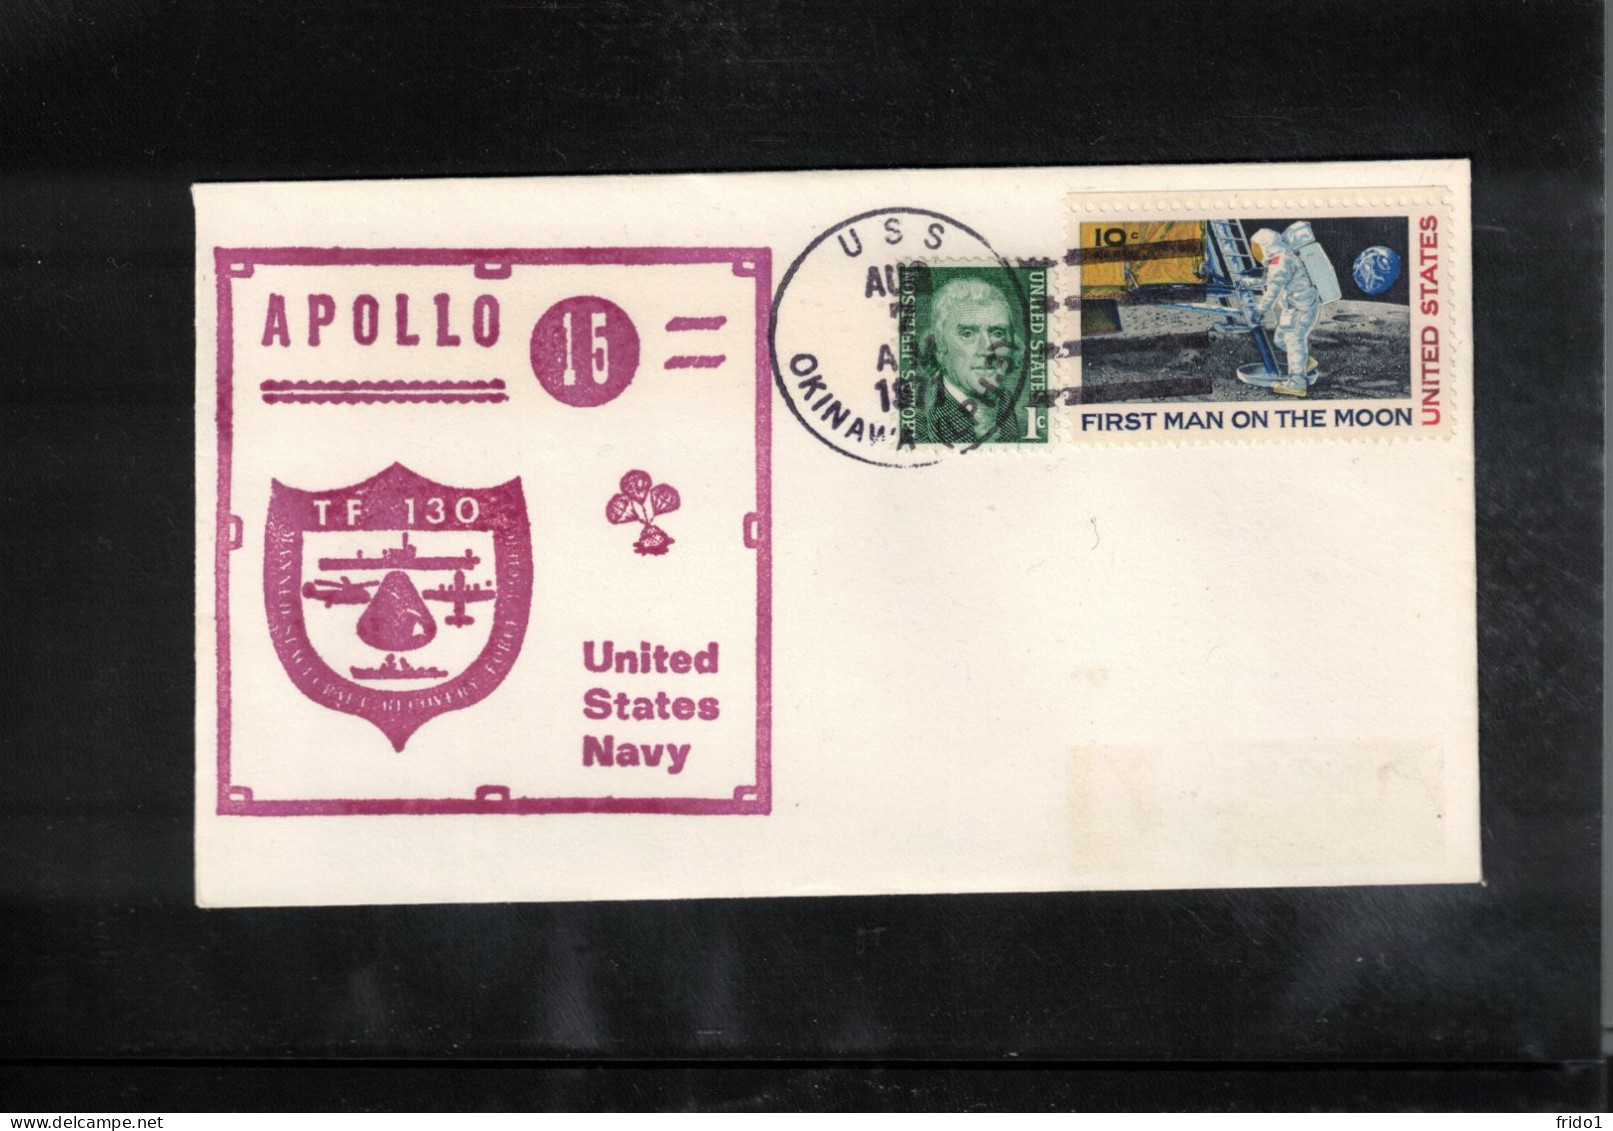 USA 1971 Space / Weltraum - Apollo 15 US Navy Recovery Force TF 130 - USS OKINAWA Interesting Cover - Estados Unidos